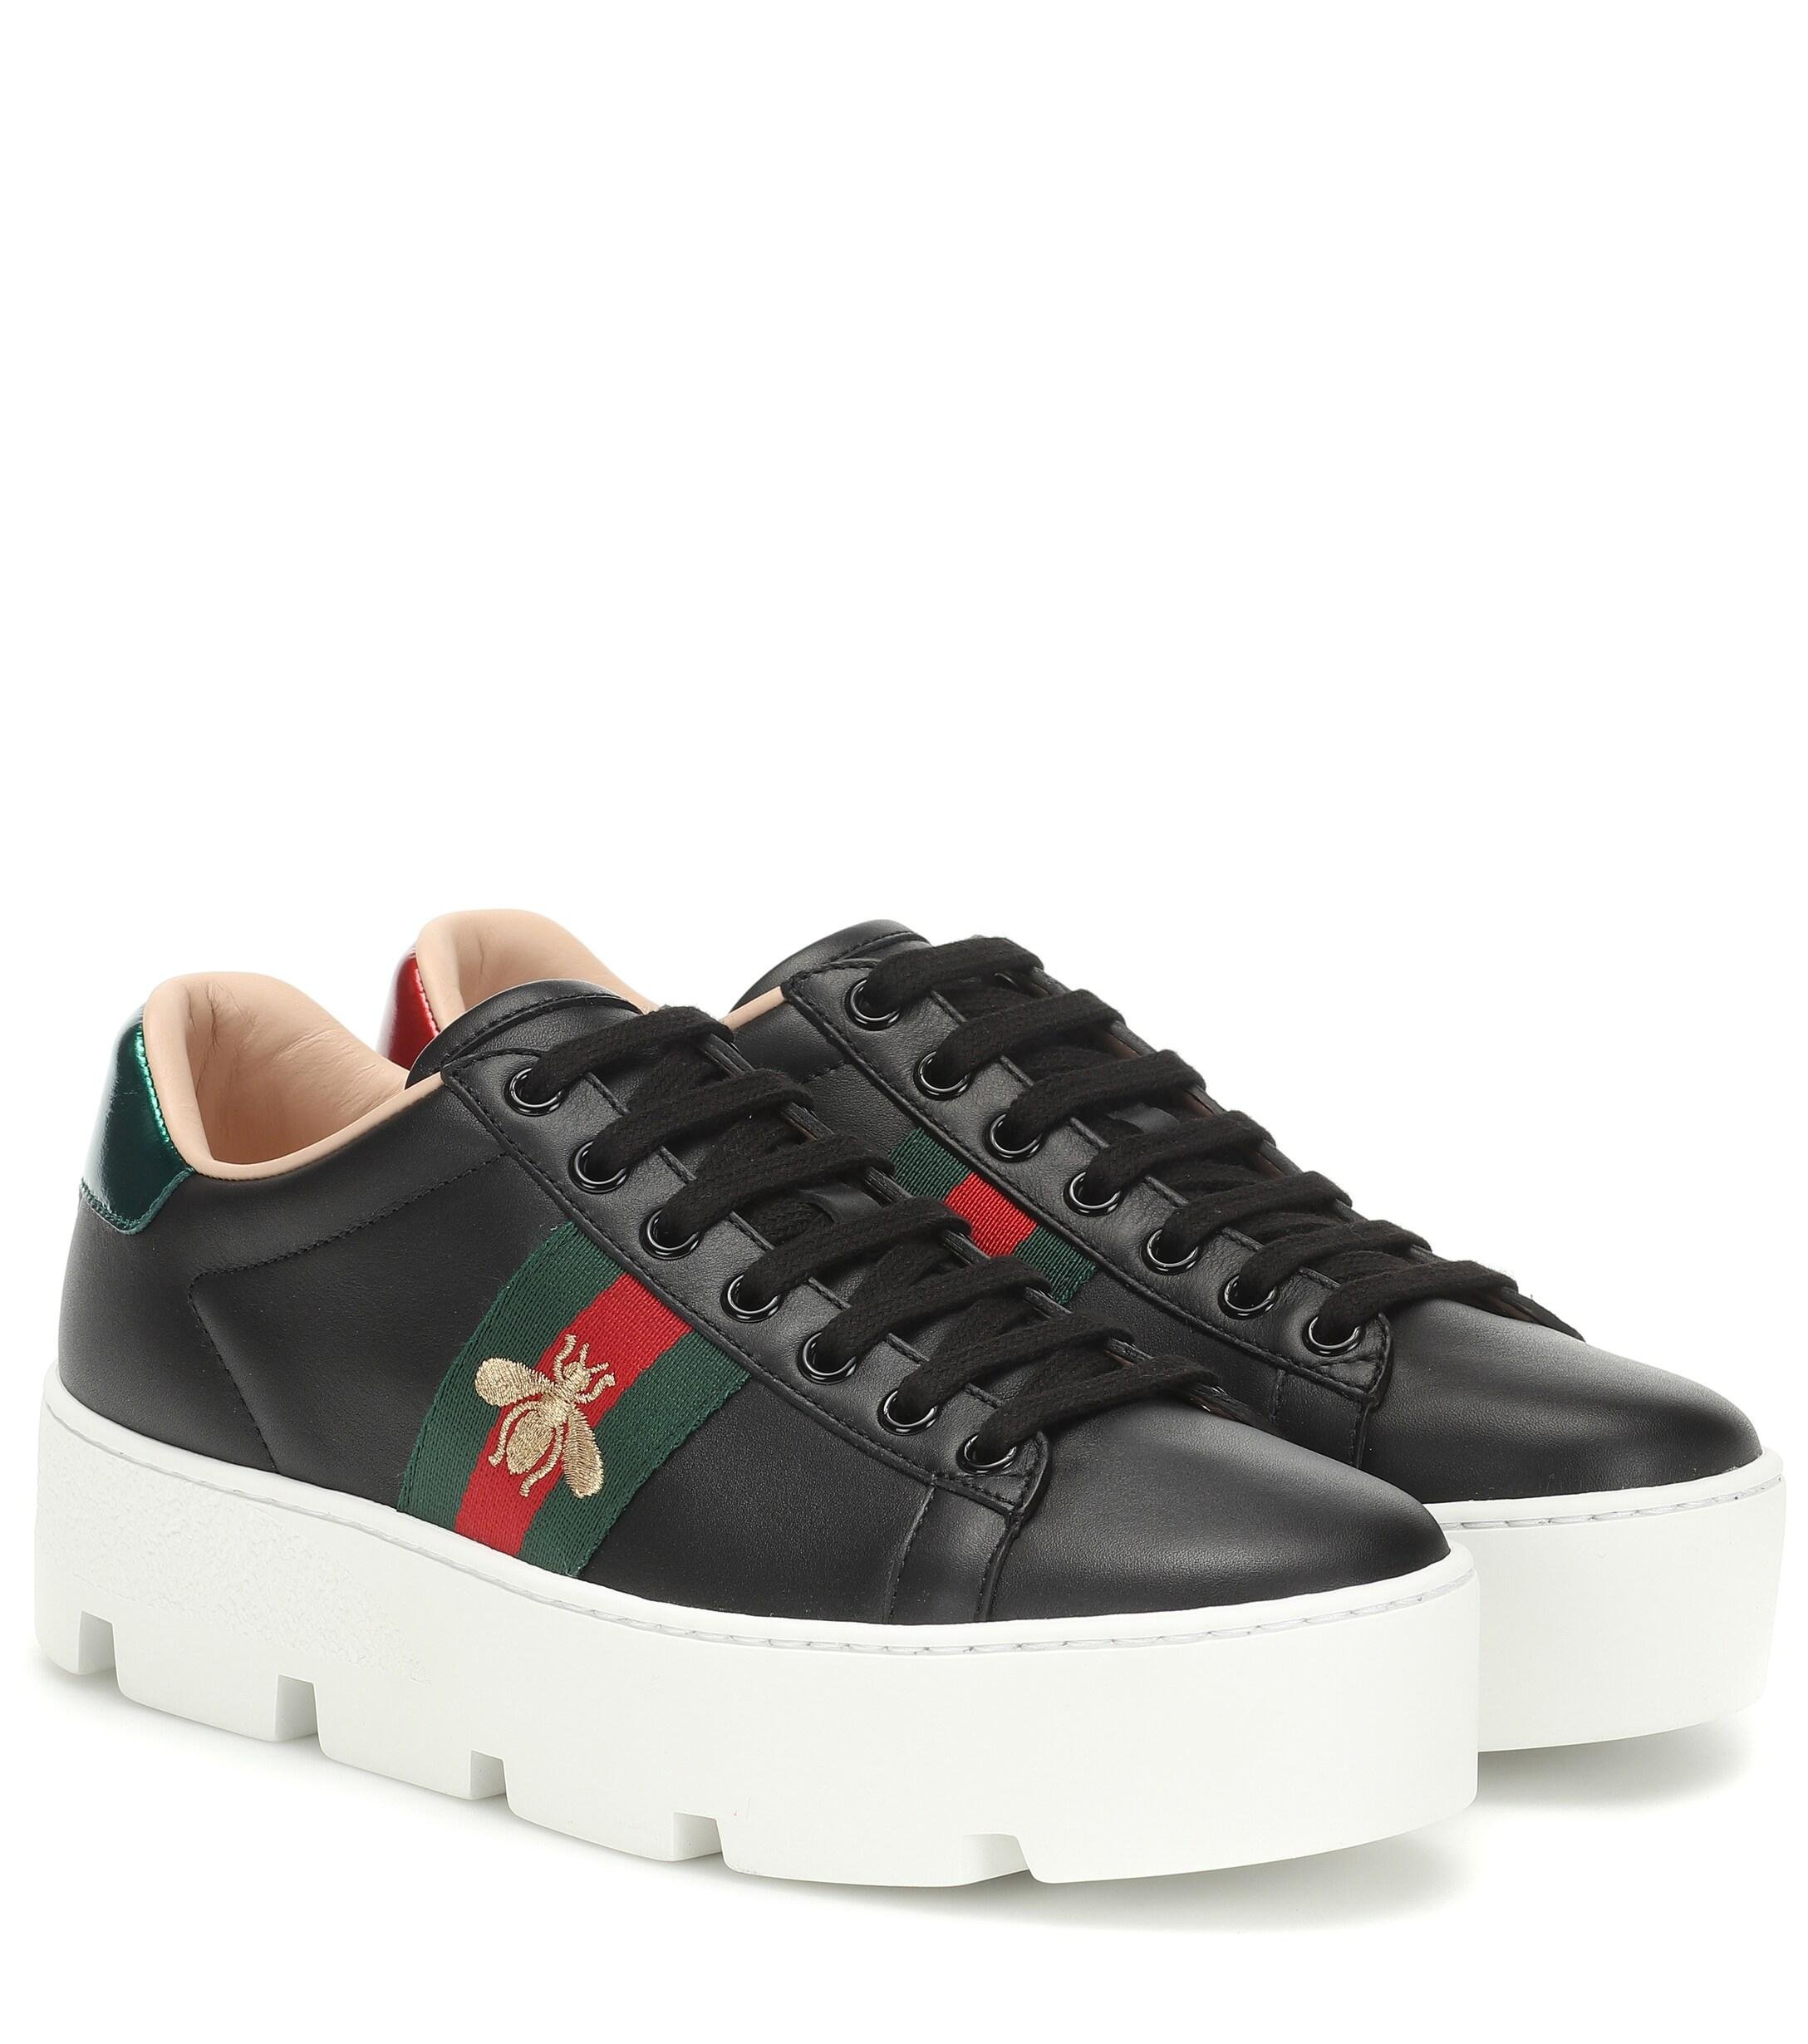 Gucci Ace Leather Platform Sneakers in Black - Save 6% - Lyst